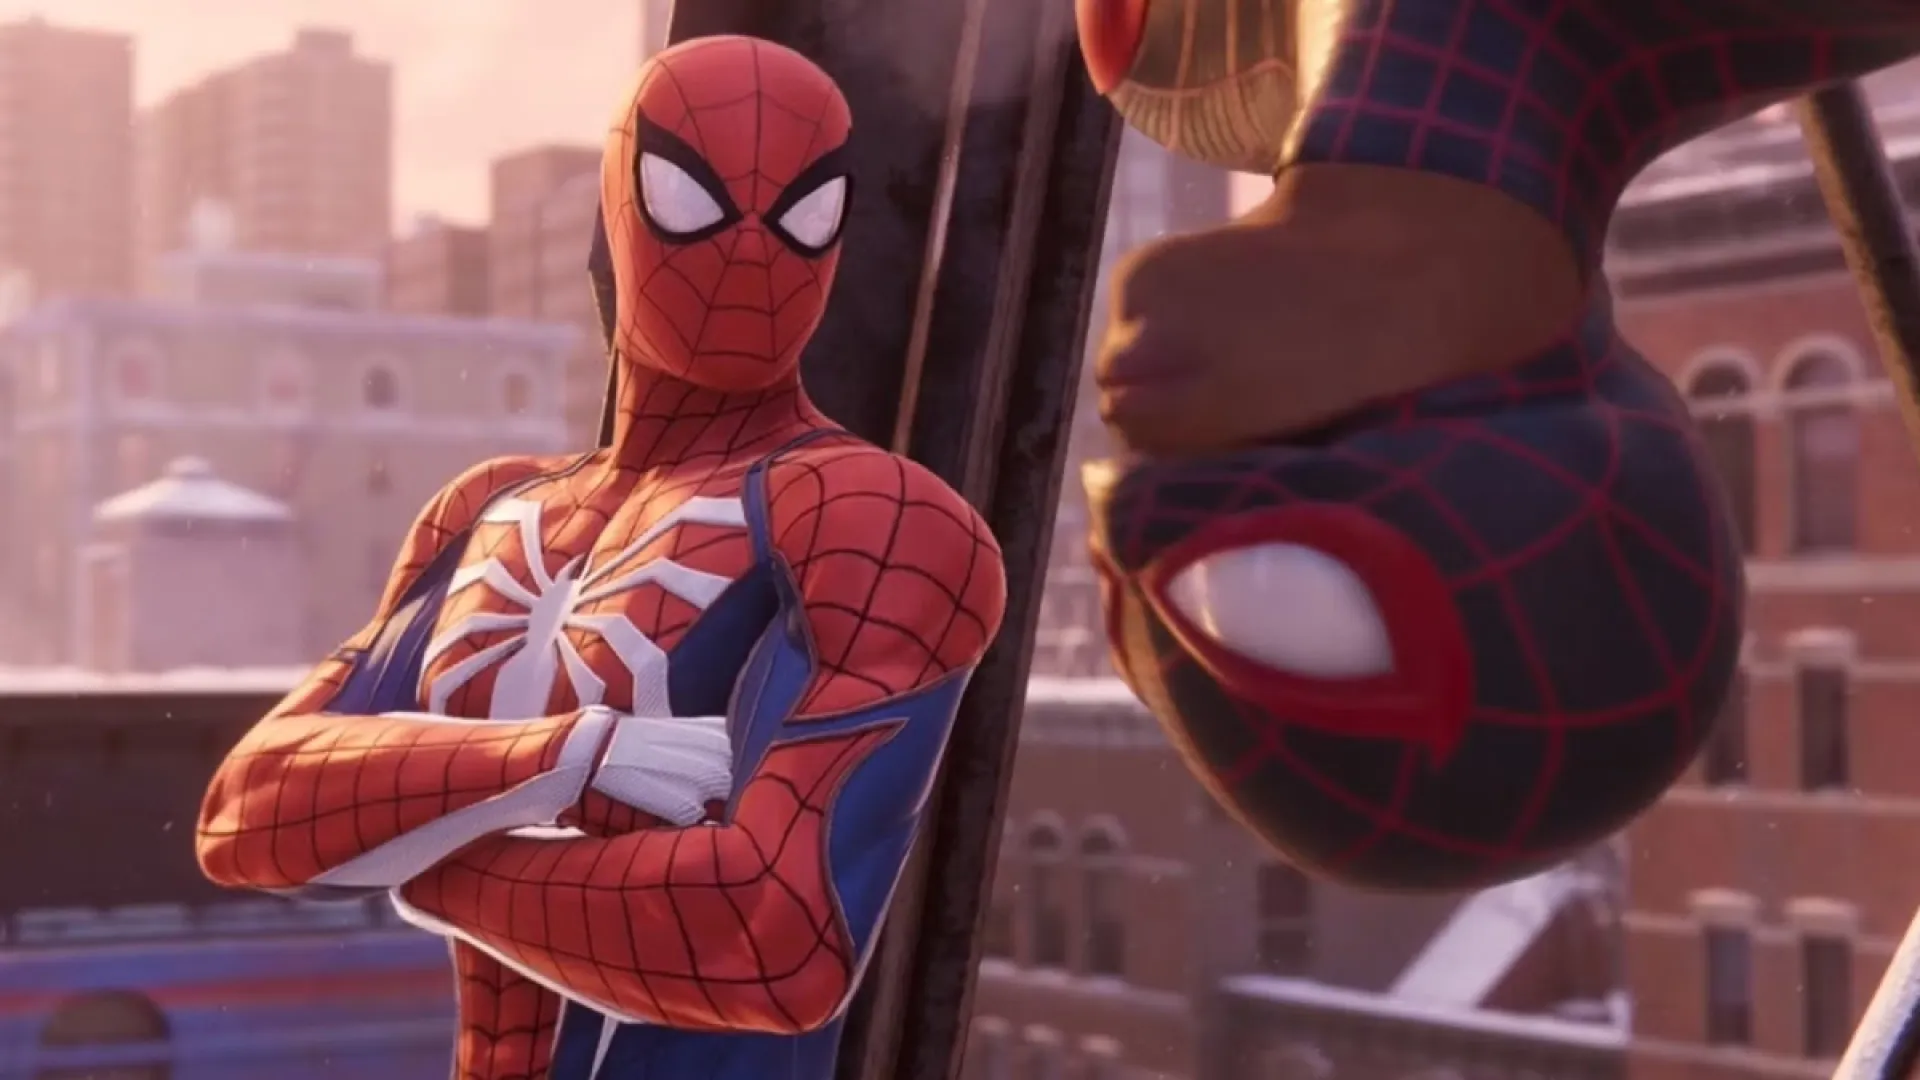 Spider-Man from the Insomniac Games 'Spider-Man' series appears with Miles Morales' Spider-Man in 'Across the Spider-Verse'